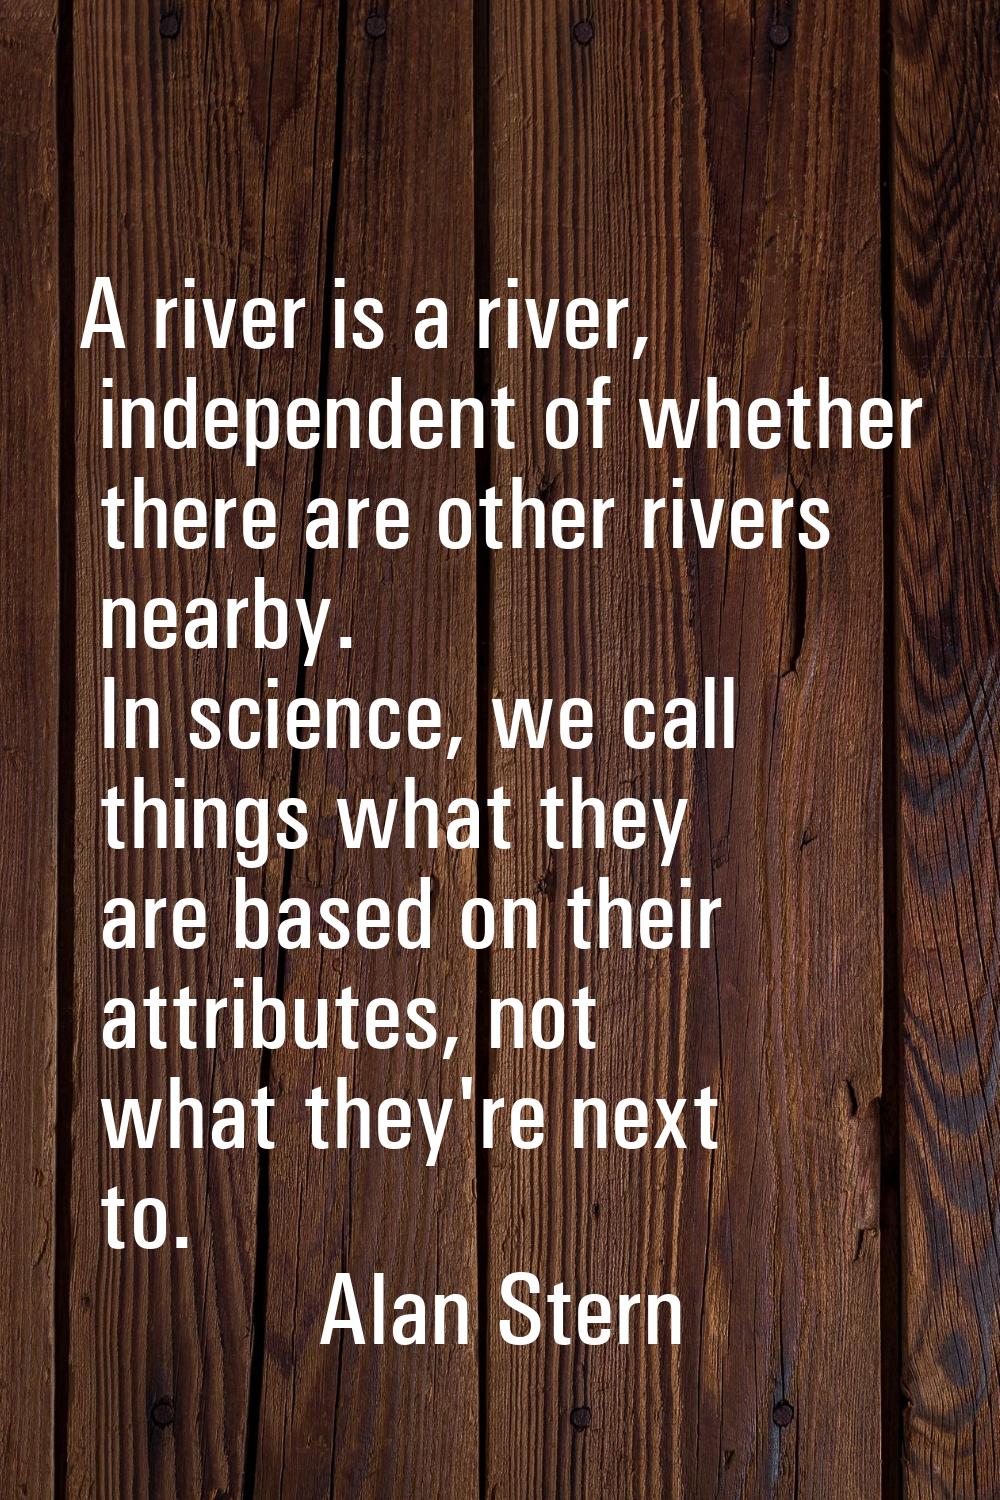 A river is a river, independent of whether there are other rivers nearby. In science, we call thing